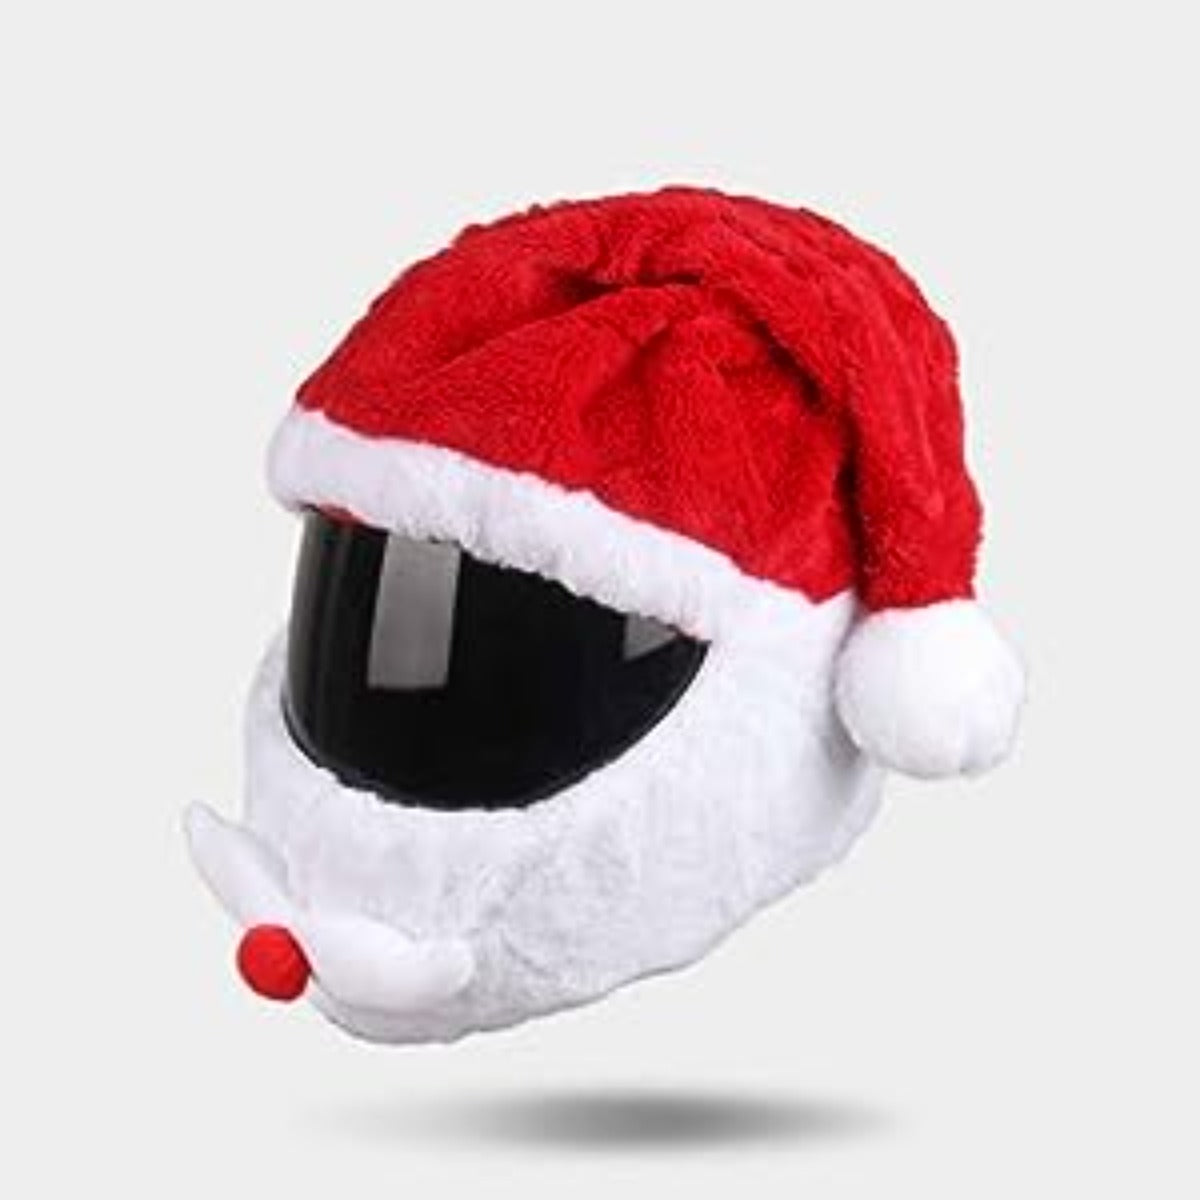 A hilarious Cool Motorcycle Helmet Cover - Santa Claus on a white background.